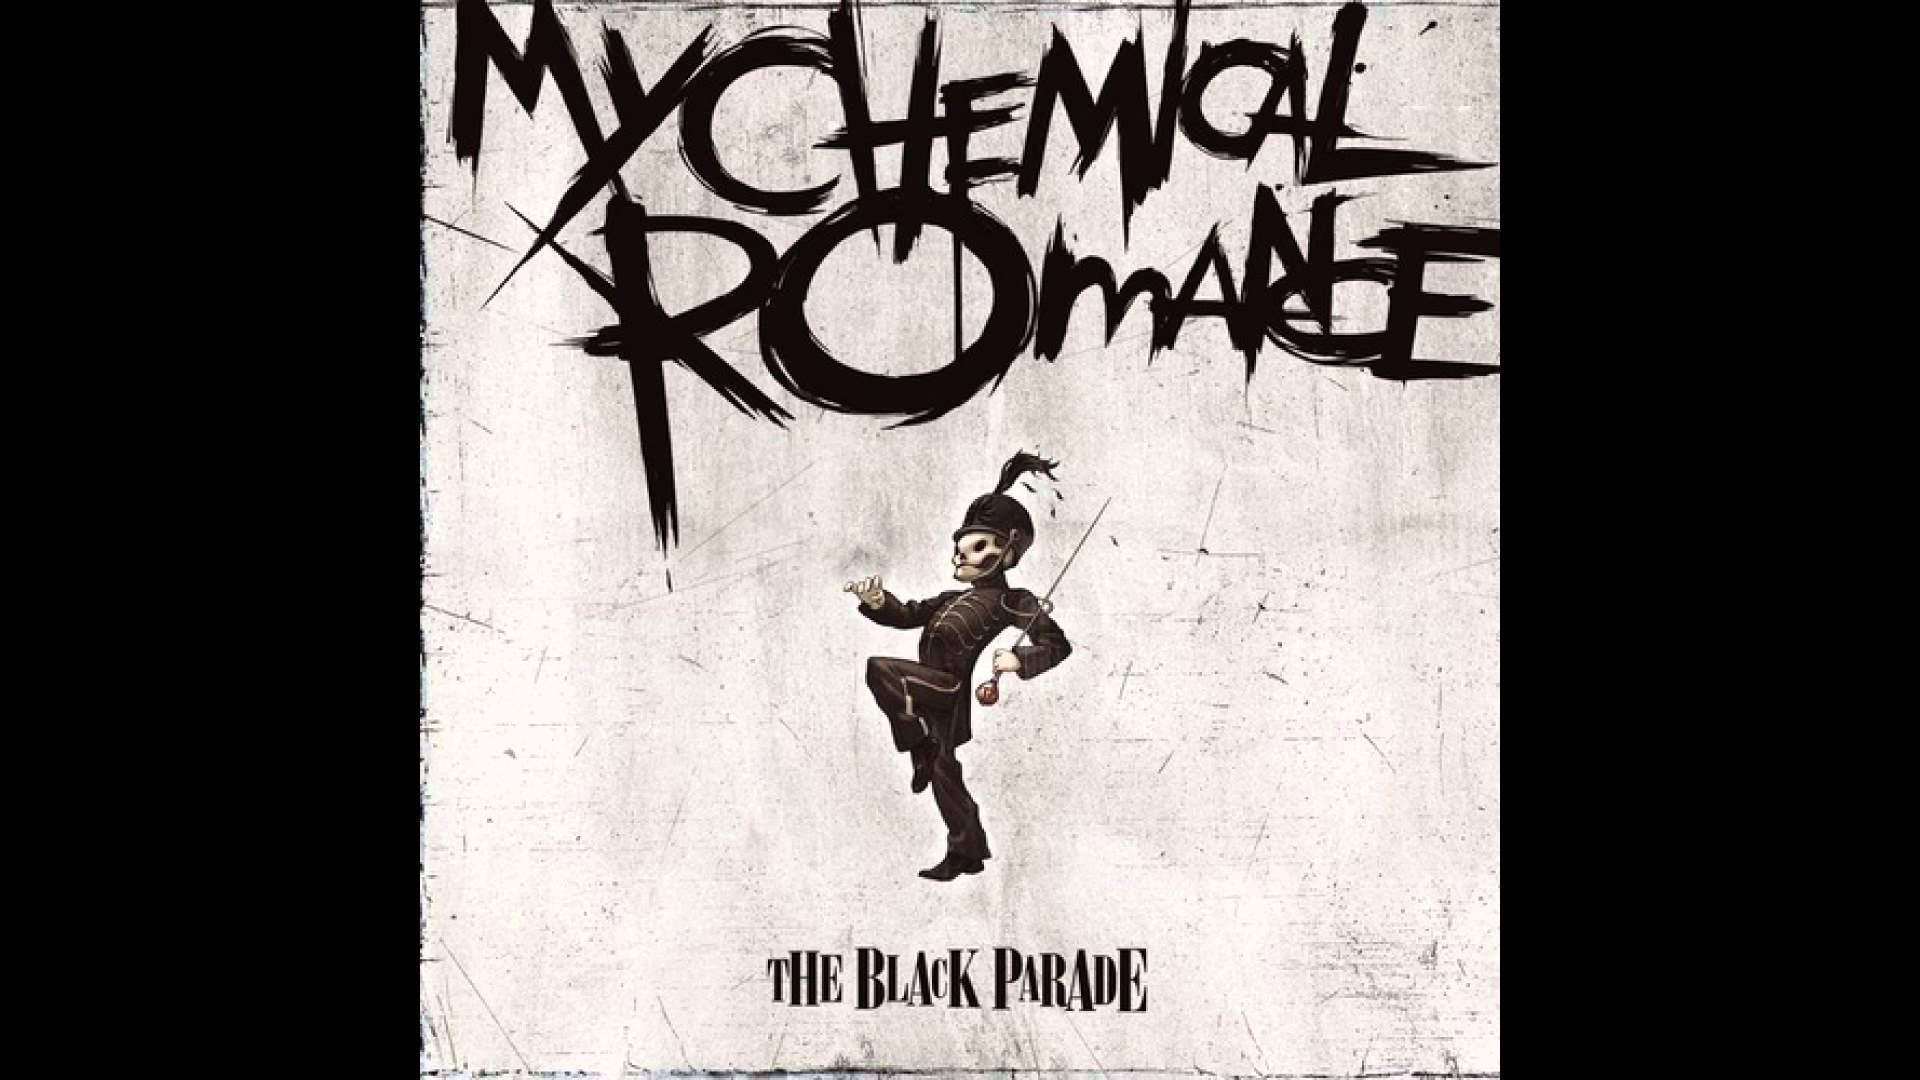 Welcome To The Black Parade (Lead Guitars Only) My Chemical Romance